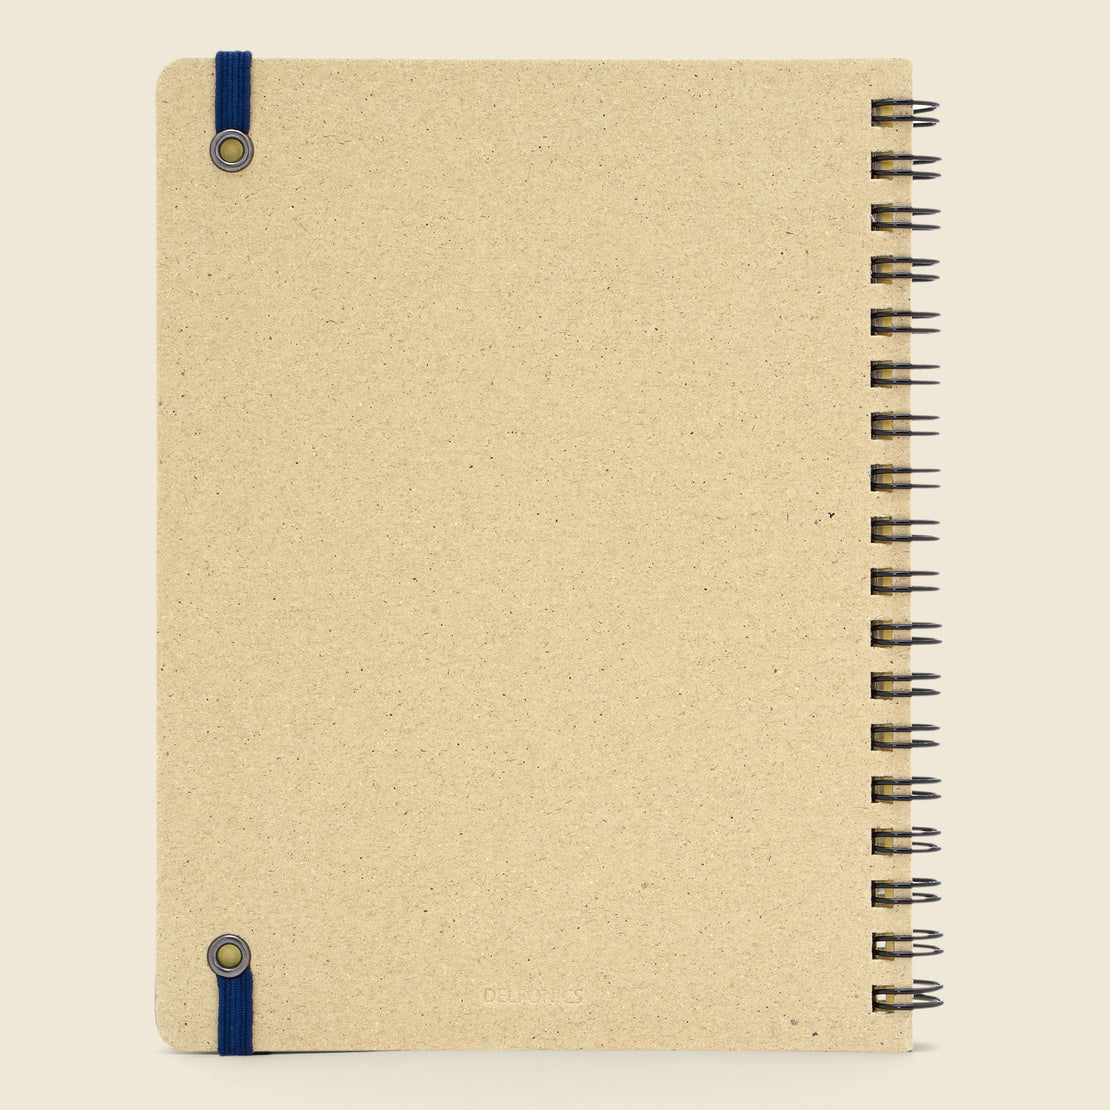 Rollbahn Spiral Notebook - Greige - Paper Goods - STAG Provisions - Home - Office - Paper Goods